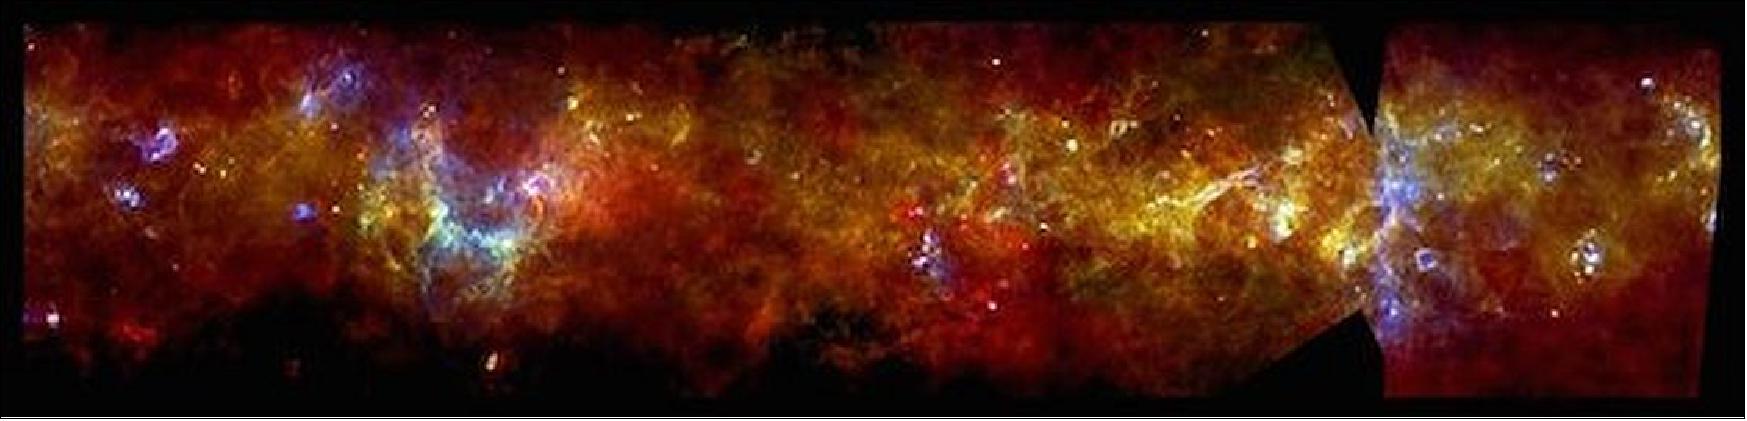 Figure 50: The filamentary structure of the Galactic Plane (image credit: ESA/PACS & SPIRE Consortium, S. Molinari, Hi-GAL Project)